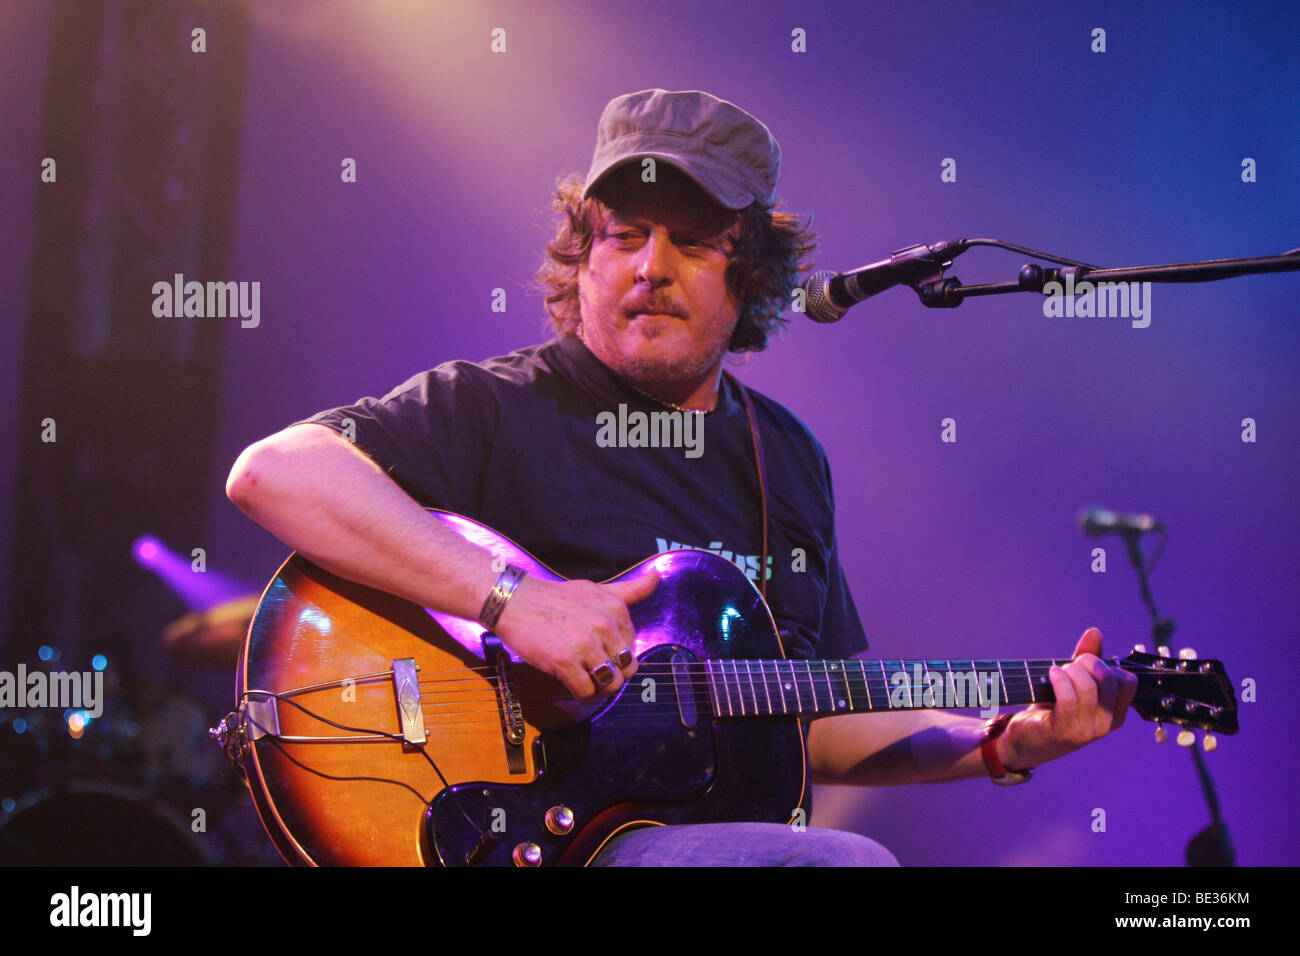 The Italian rock musician Zucchero live at the Blue Balls Festival in the Luzernersaal hall of the KKL venue in Lucerne, Switze Stock Photo